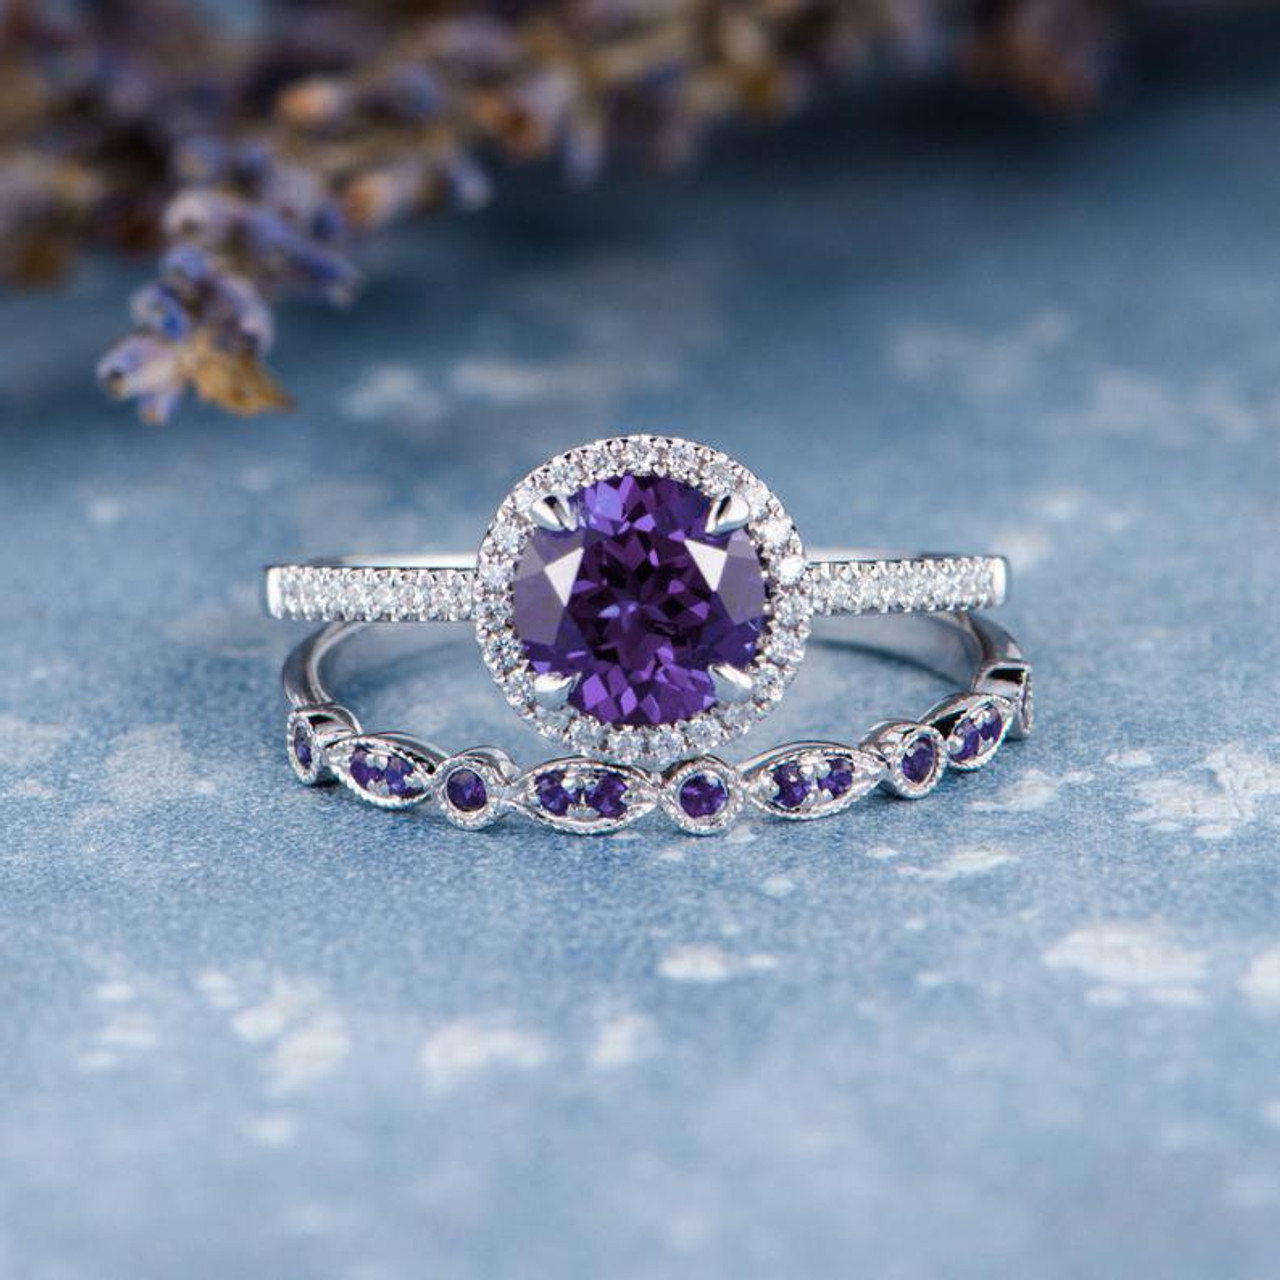 diamond promise ring Vintage Gold Amethyst and Diamond Band february birthstone vintage gold band -vintage engagement amethyst band